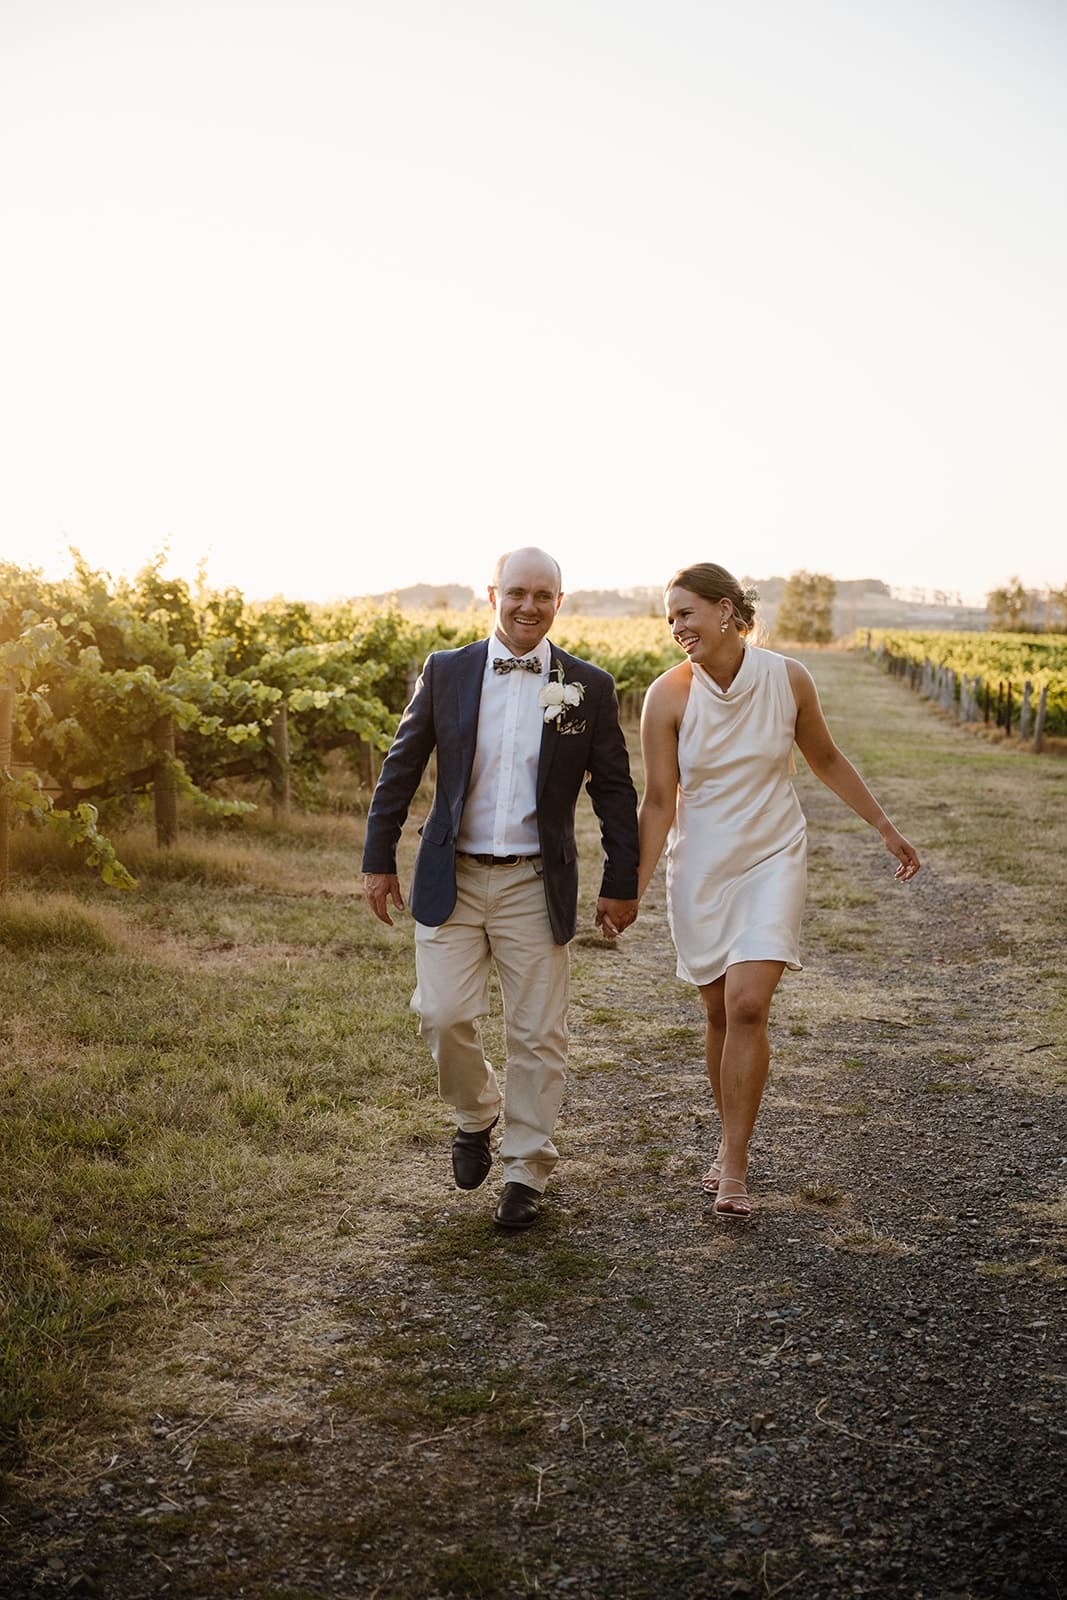 The Ultimate Guide to Booking a Vineyard Wedding in Central West, NSW